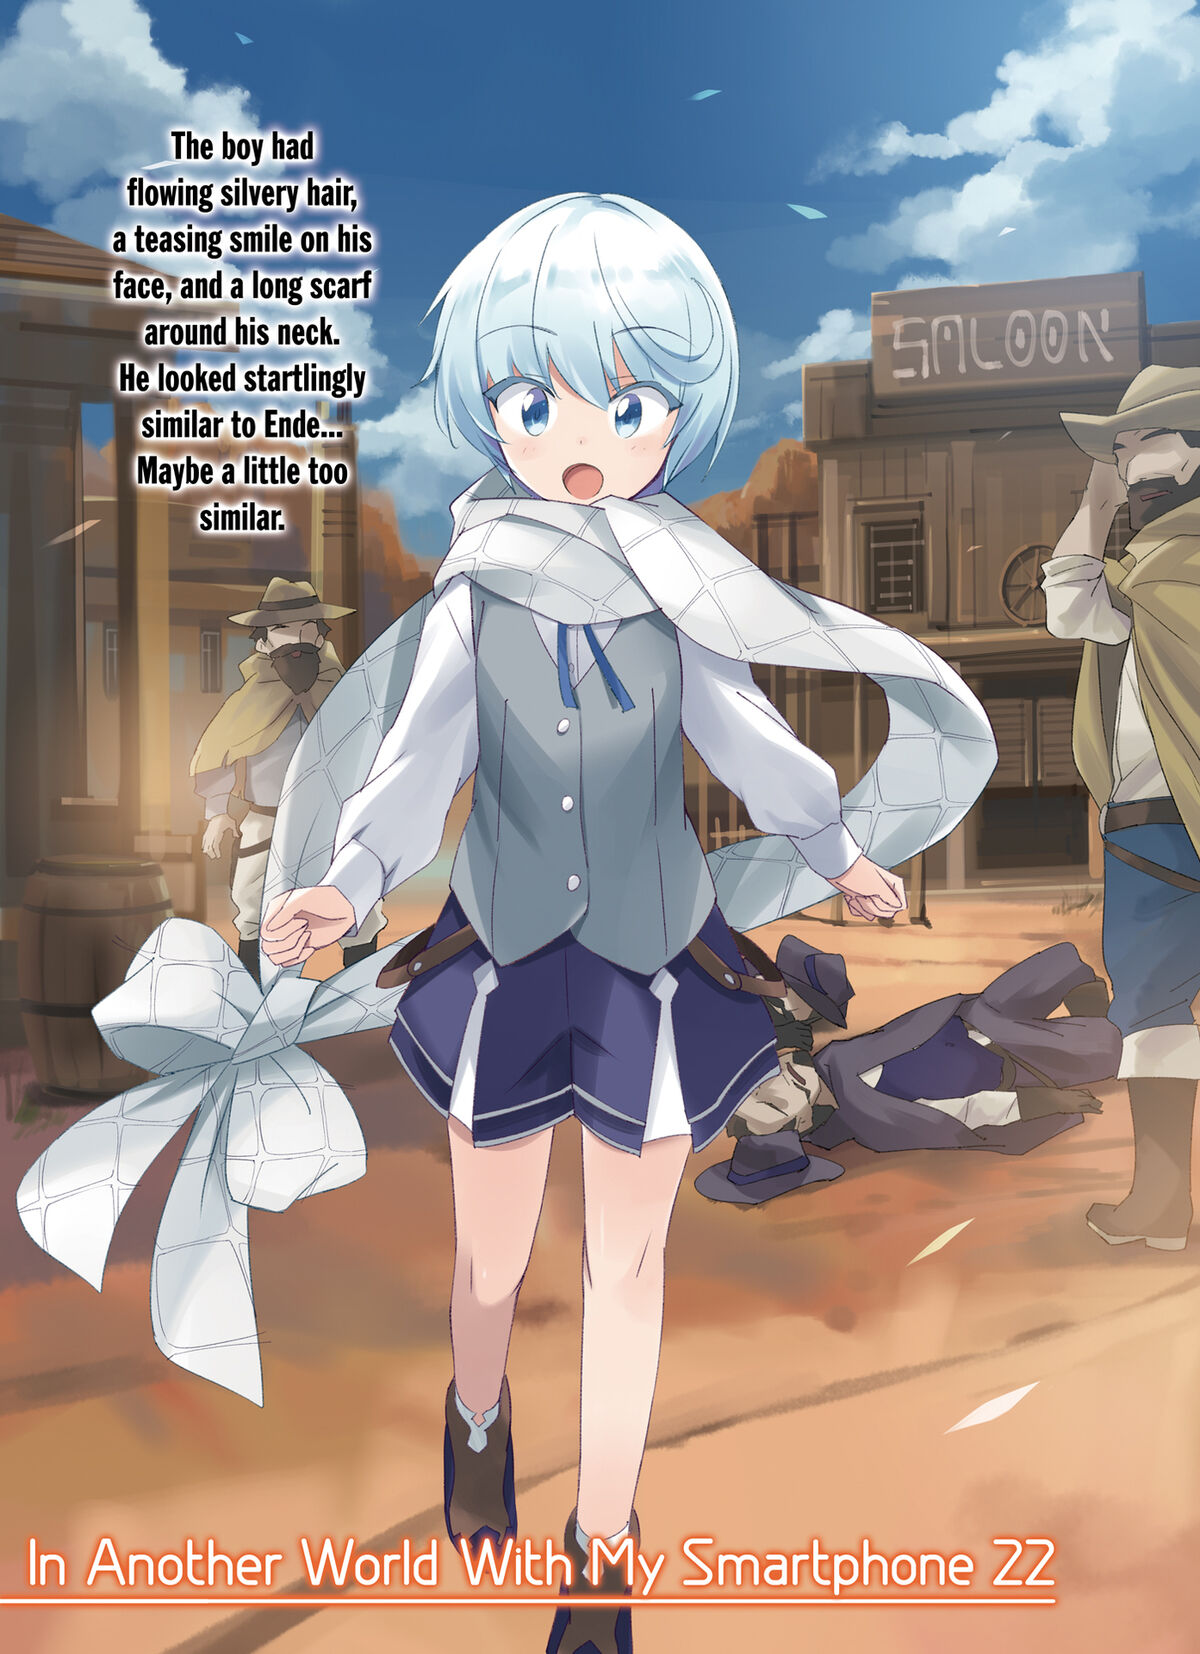 Light Novel Volume 22  In Another World With My Smartphone Wiki